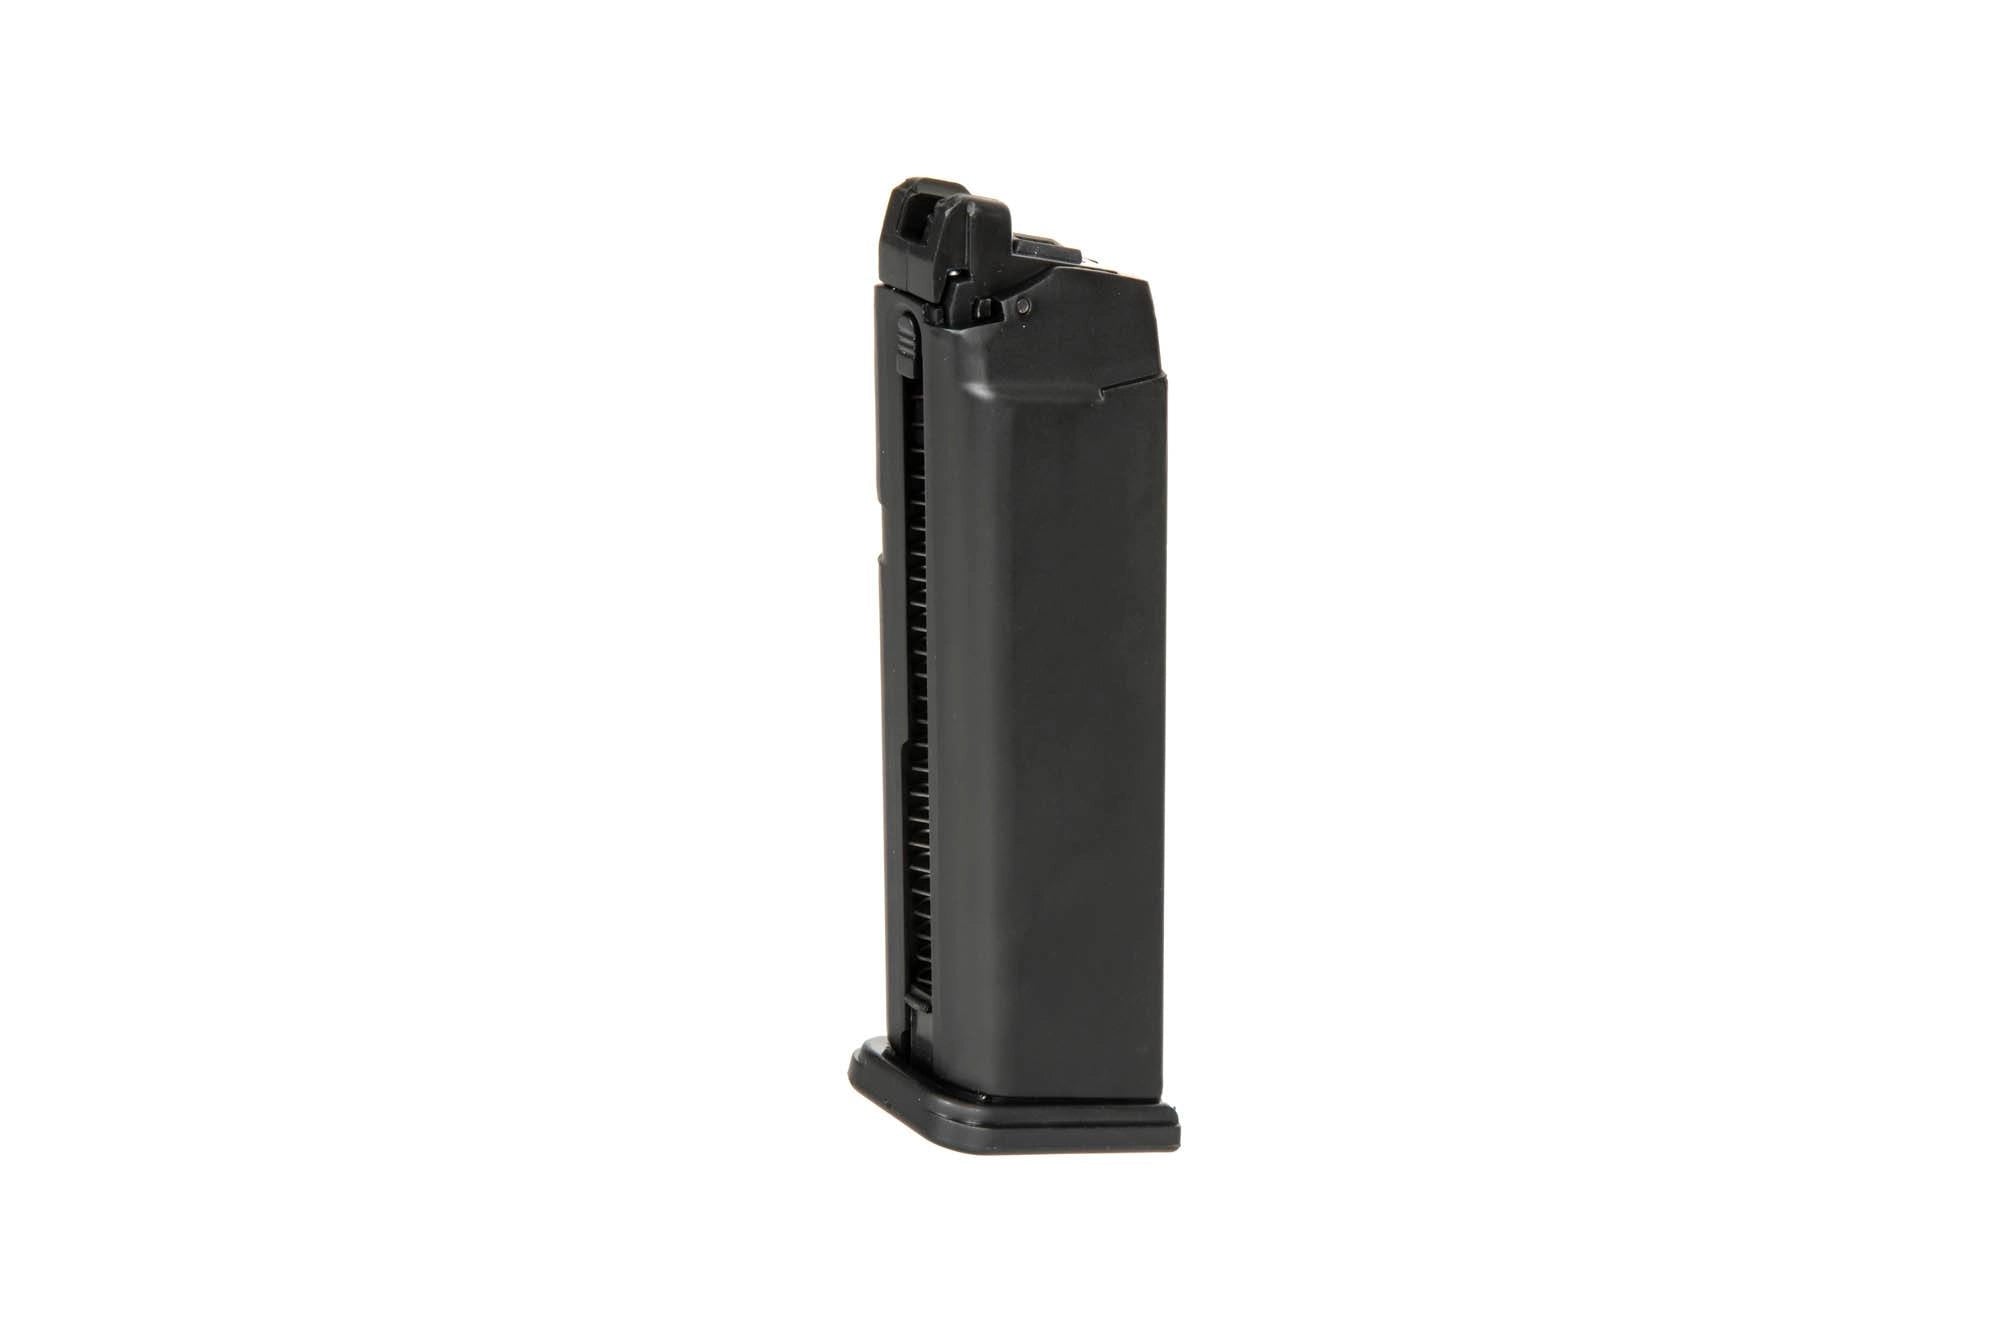 CO2 22 BB Magazine for Double Bell 821 (G17) Replicas